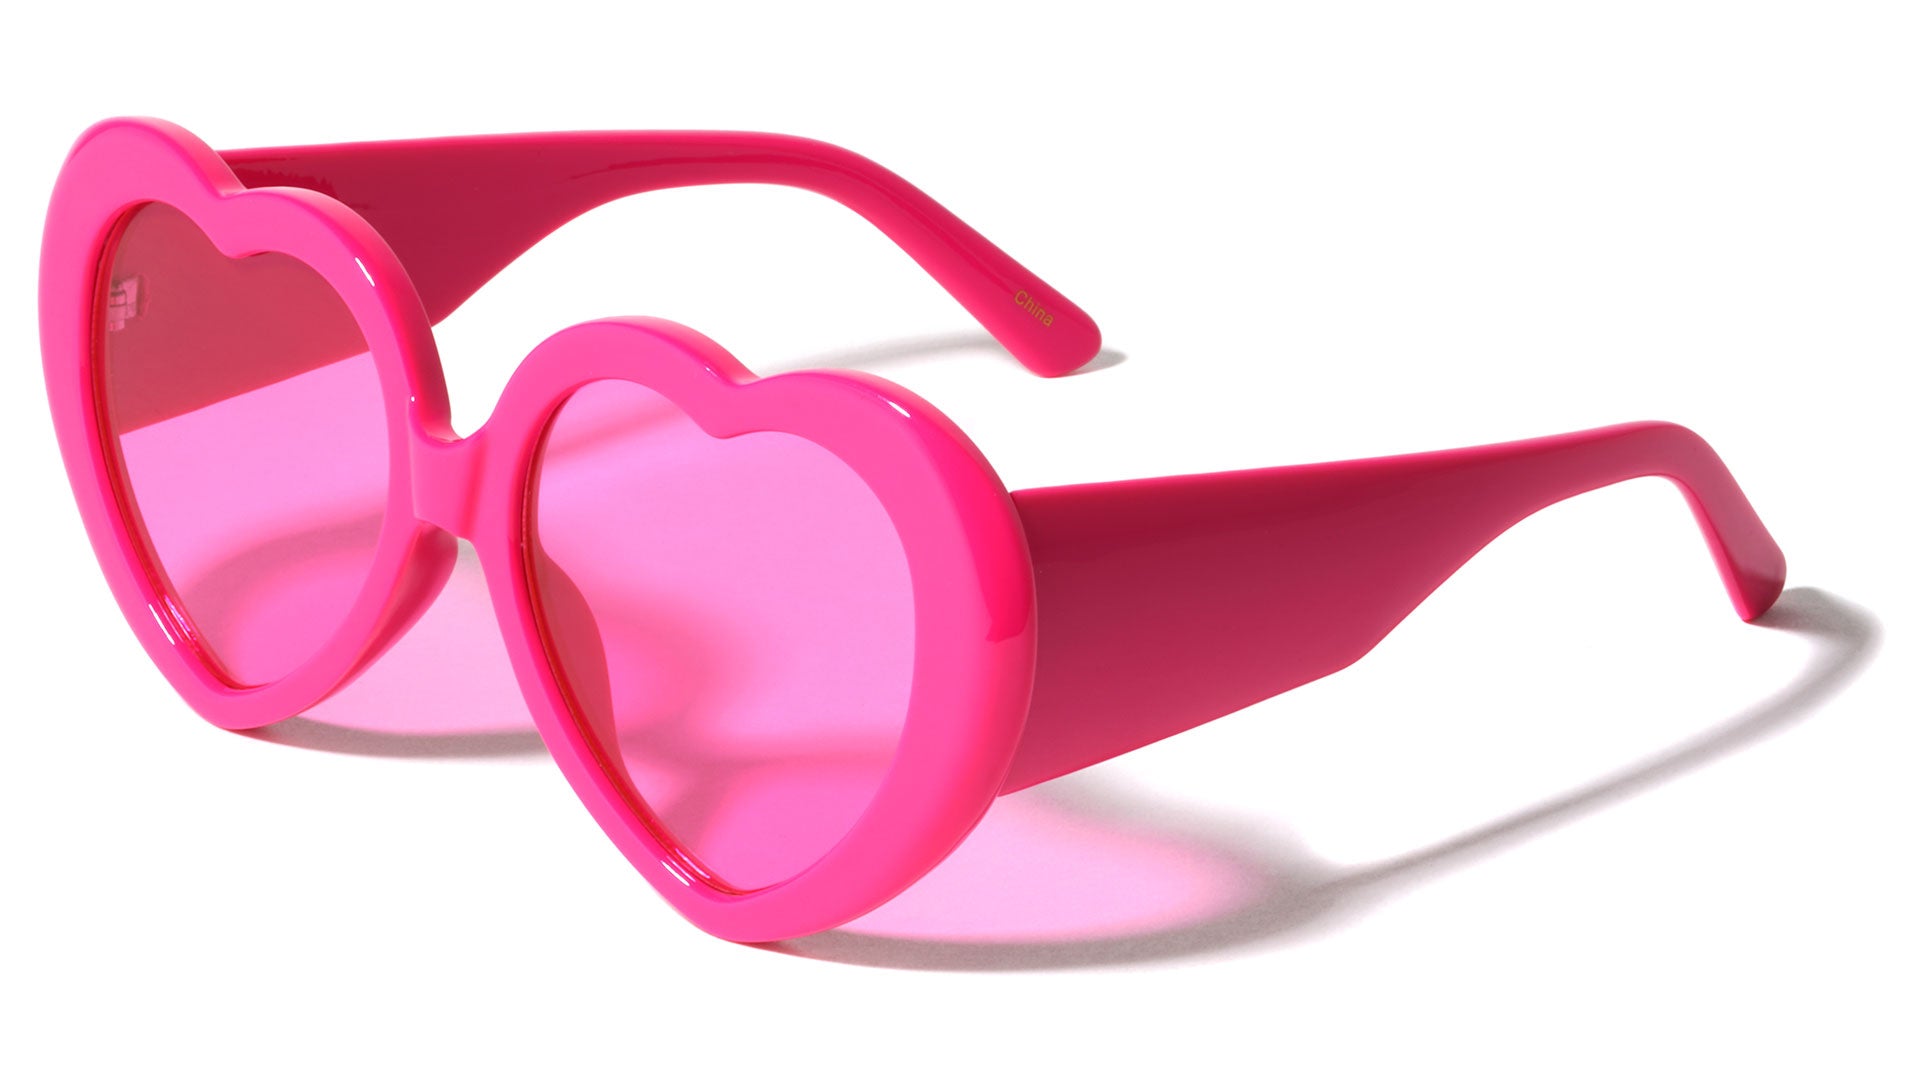 Hot Pink Polarized Sunglasses | Recycled Plastic | Waxhead All 4 Colors, Save 20%